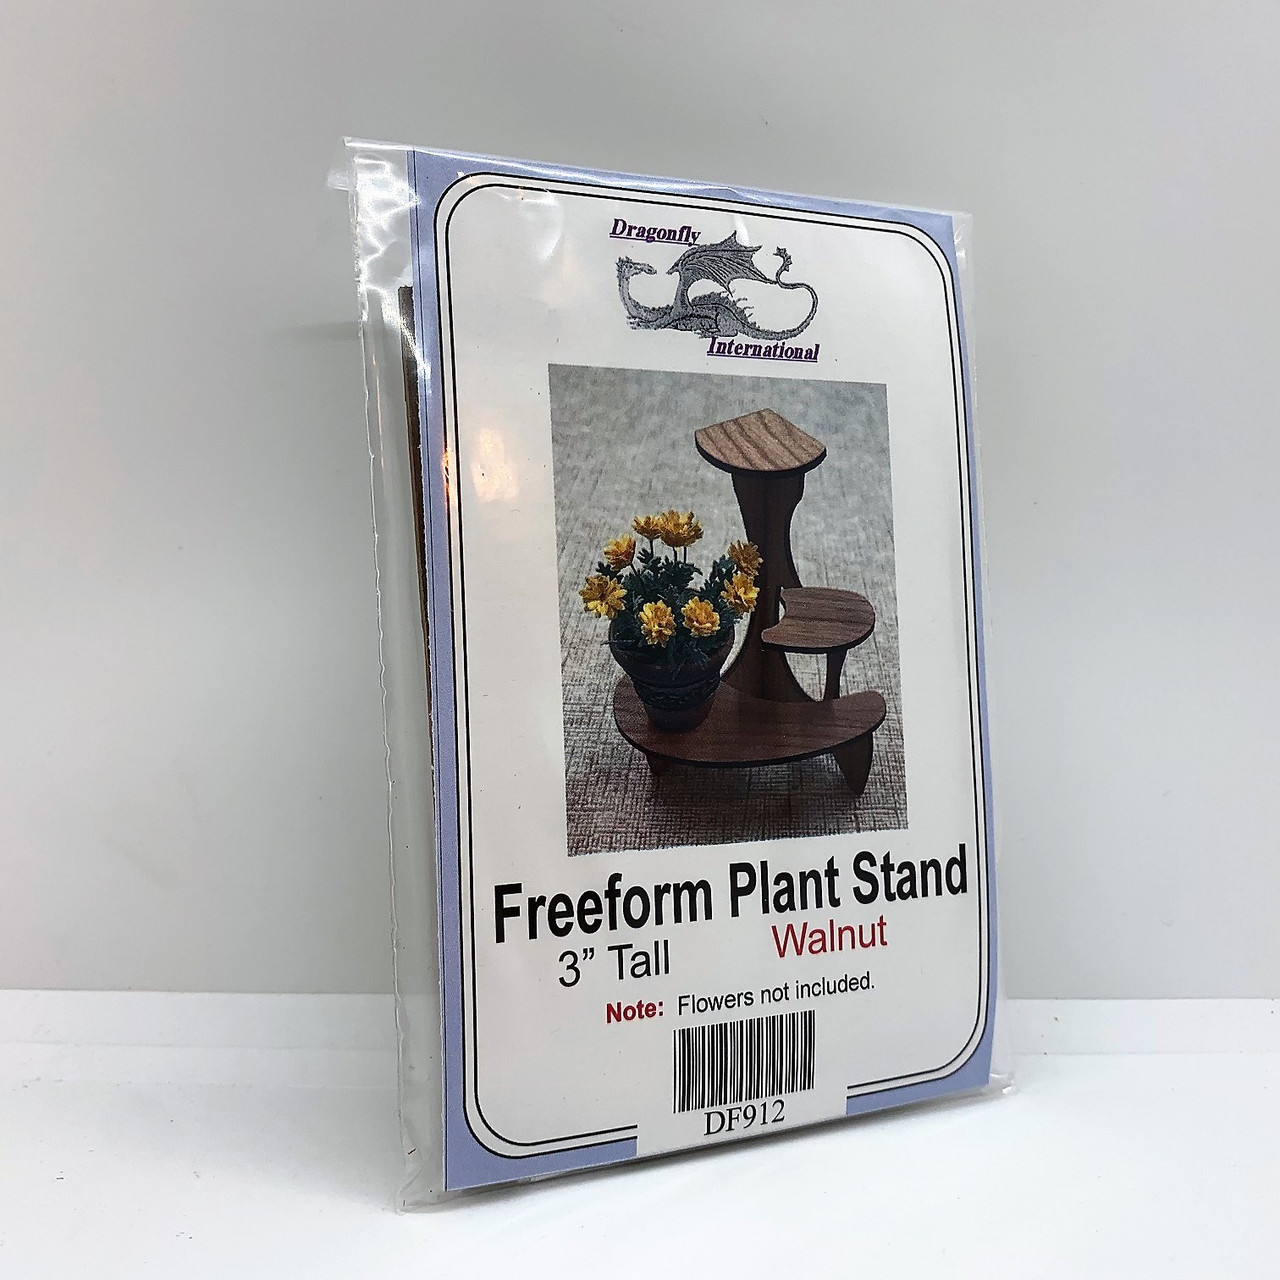 Freeform Plant Stand Kit, Walnut Finish (DFIDF912) shown in package